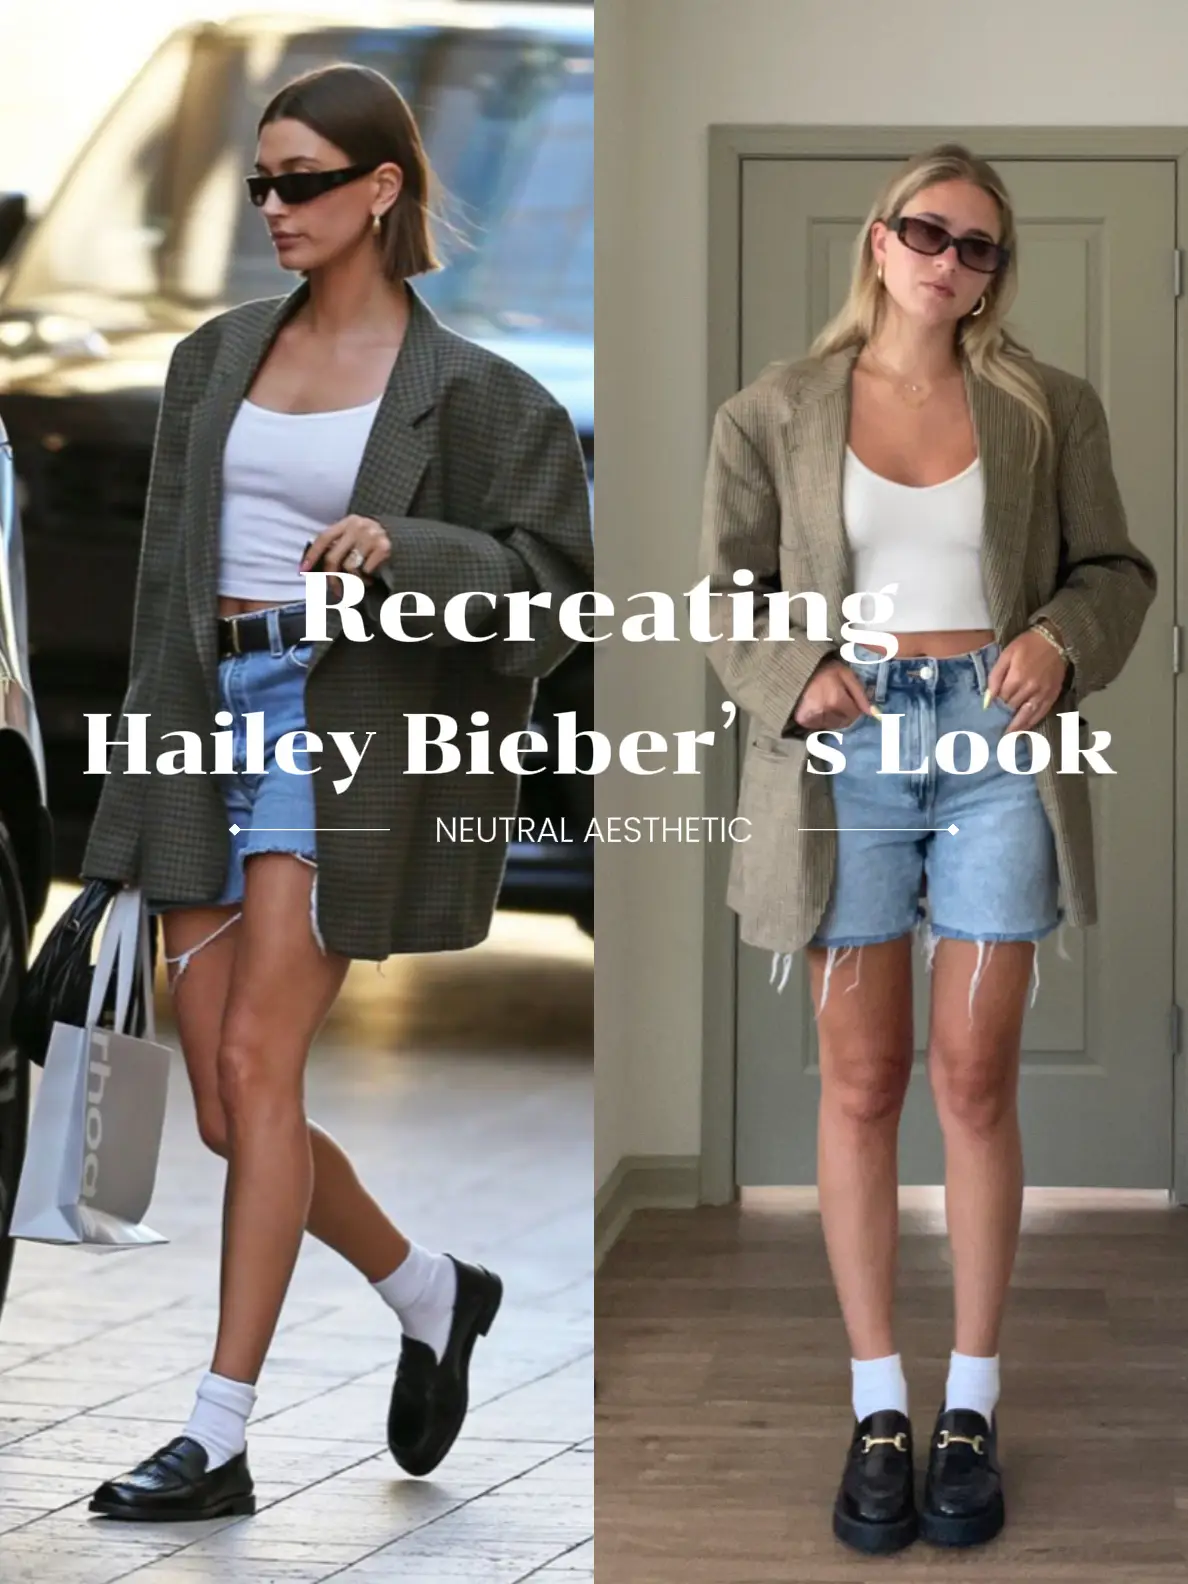 Recreating Hailey Bieber's look  Gallery posted by Sarah Harden